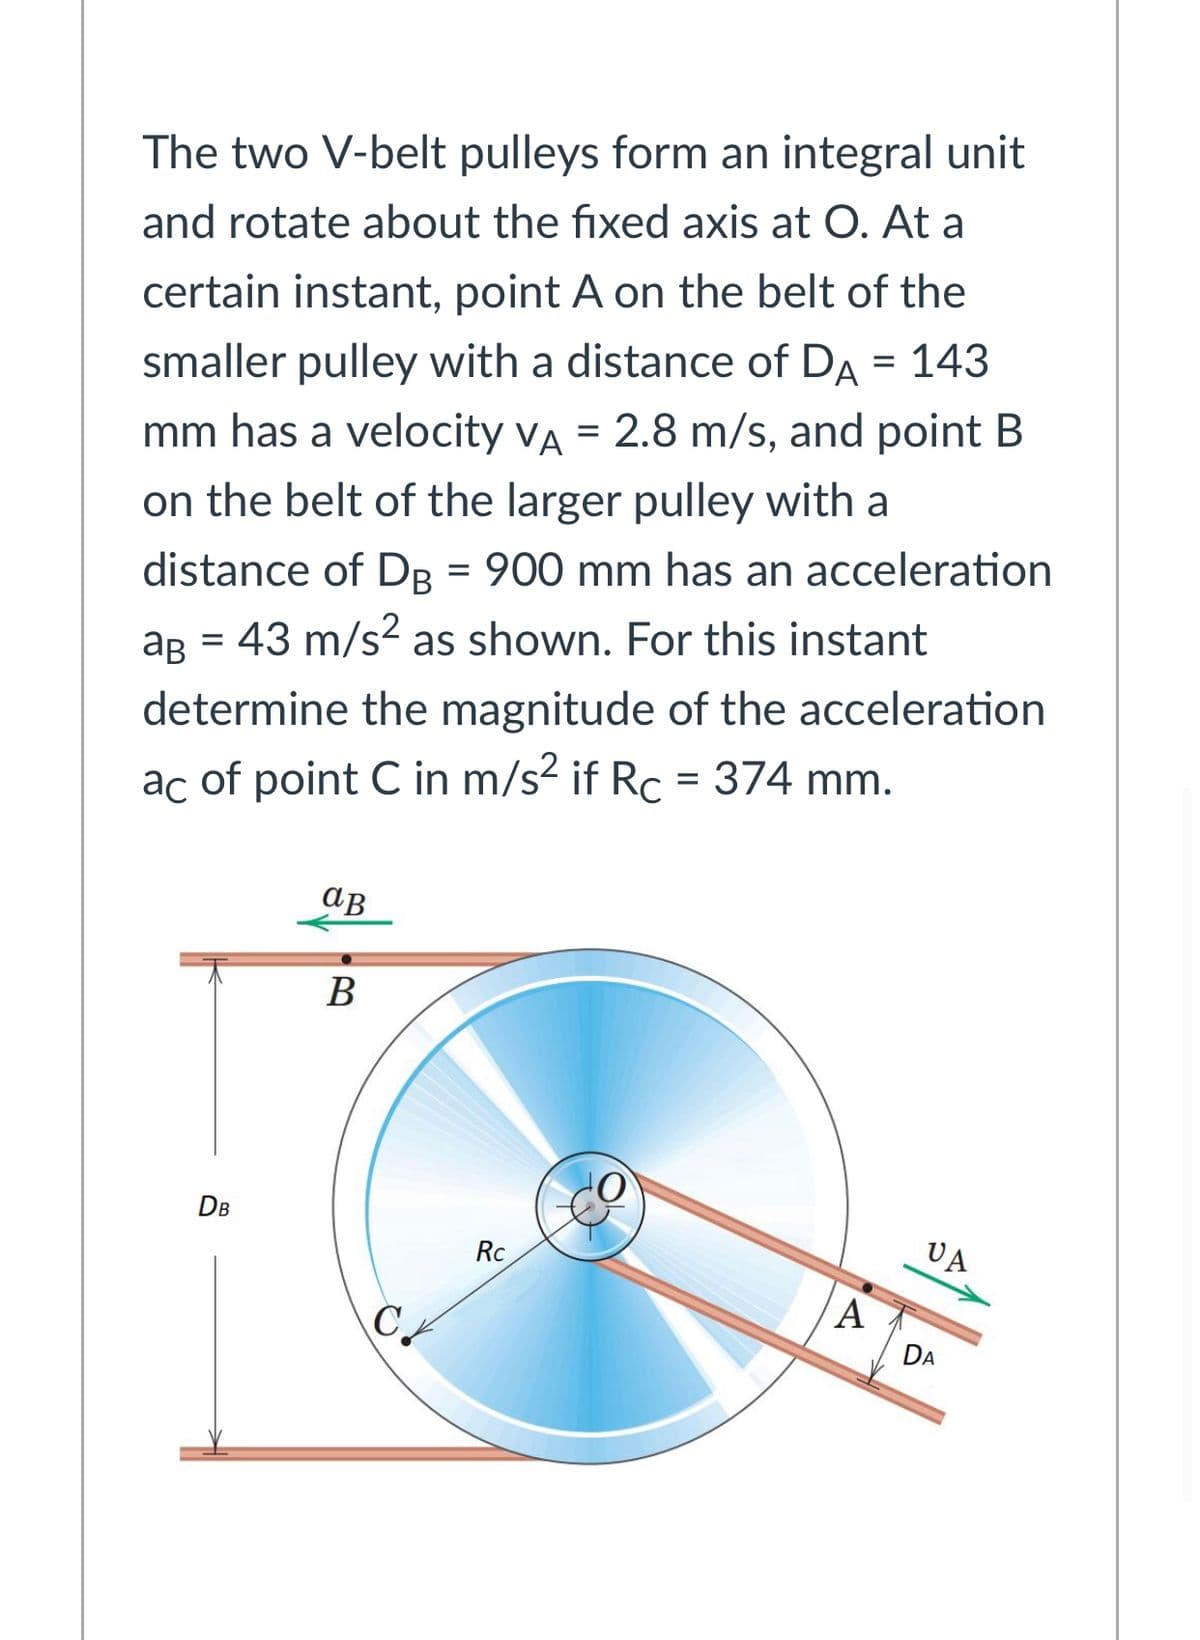 The two V-belt pulleys form an integral unit
and rotate about the fixed axis at O. At a
certain instant, point A on the belt of the
smaller pulley with a distance of DA = 143
mm has a velocity VA = 2.8 m/s, and point B
on the belt of the larger pulley with a
distance of DB = 900 mm has an acceleration
ag = 43 m/s? as shown. For this instant
determine the magnitude of the acceleration
ac of point C in m/s? if Rc = 374 mm.
ав
В
DB
UA
Rc
A
DA
